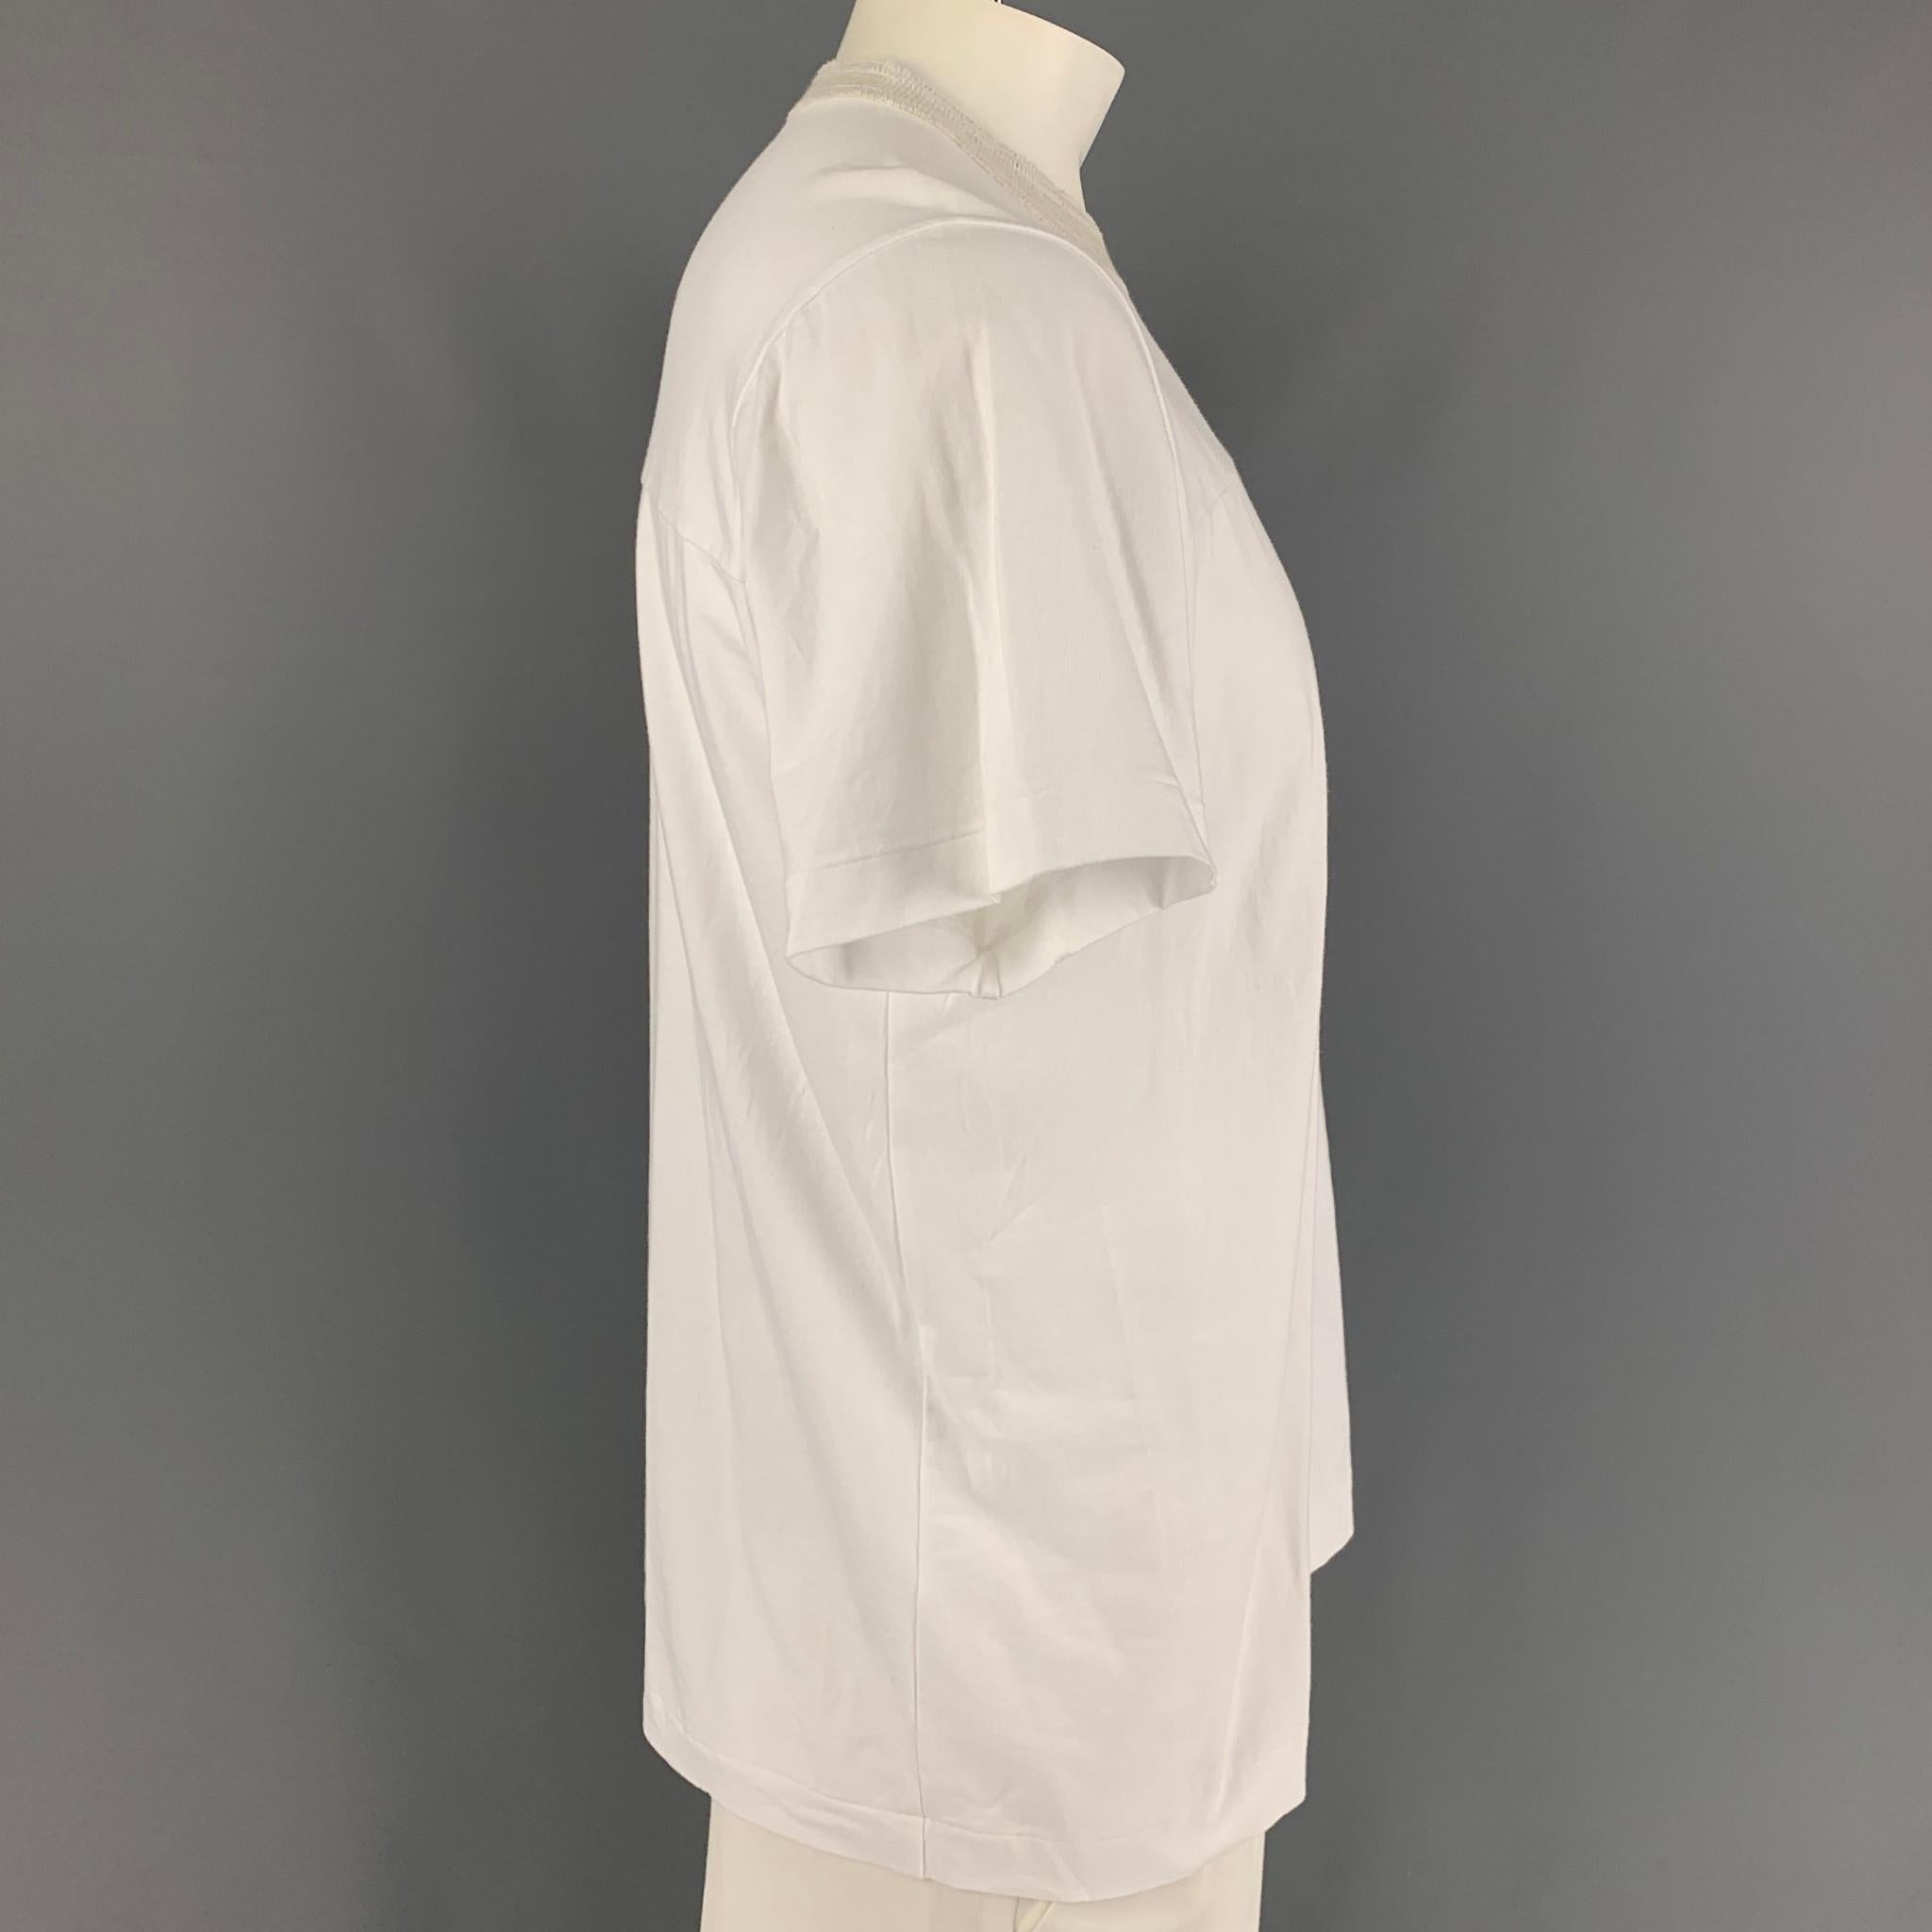 SACAI t-shirt comes in a white cotton featuring a front slit pocket and a ribbed crew-neck. 

Very Good Pre-Owned Condition.
Marked: 4

Measurements:

Shoulder: 19 in.
Chest: 42 in.
Sleeve: 9 in.
Length: 27 in. 